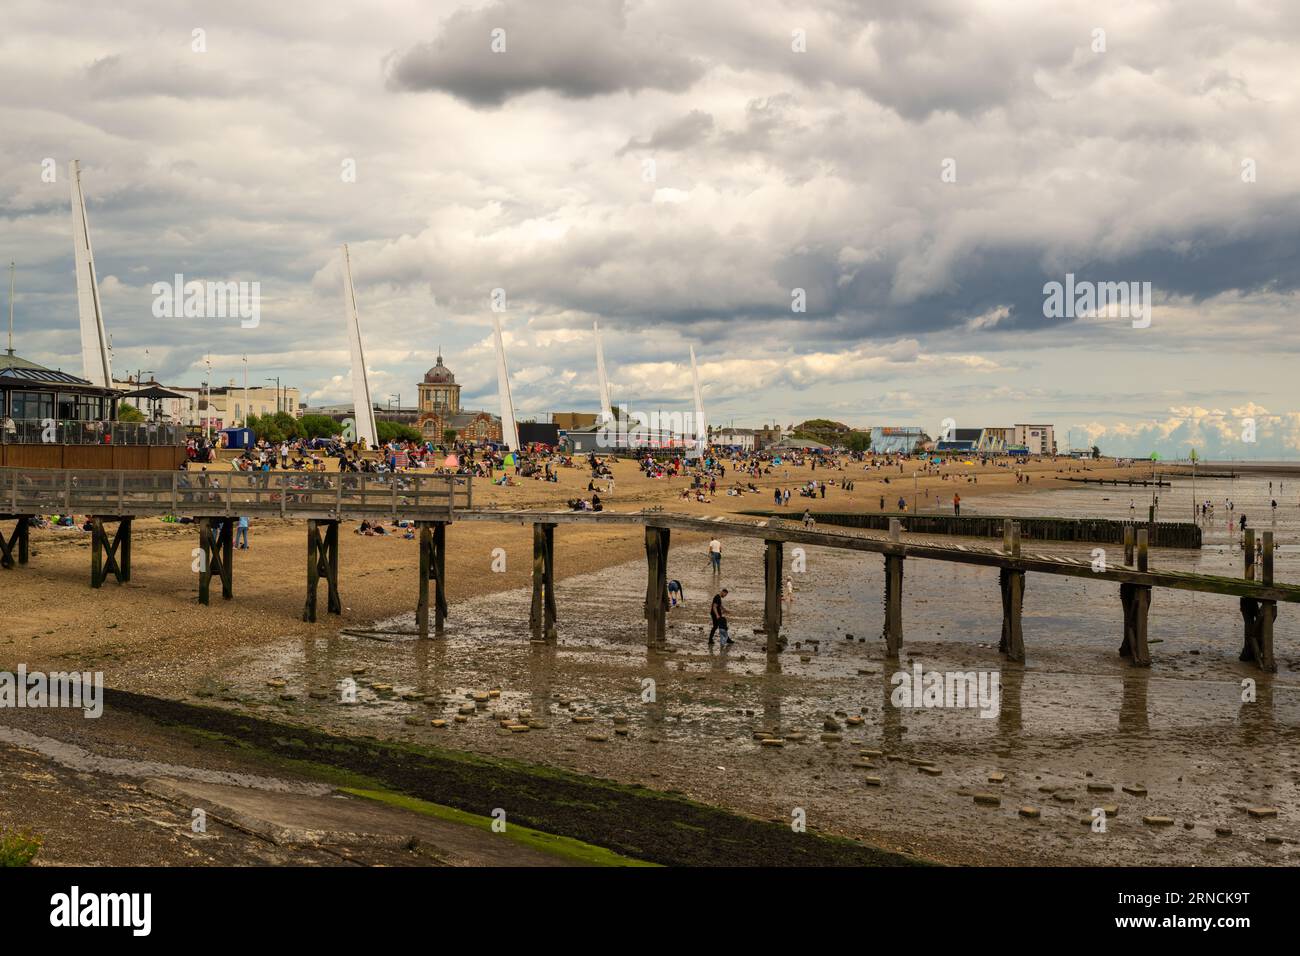 The beach at Southend-on-Sea, Essex, England Stock Photo